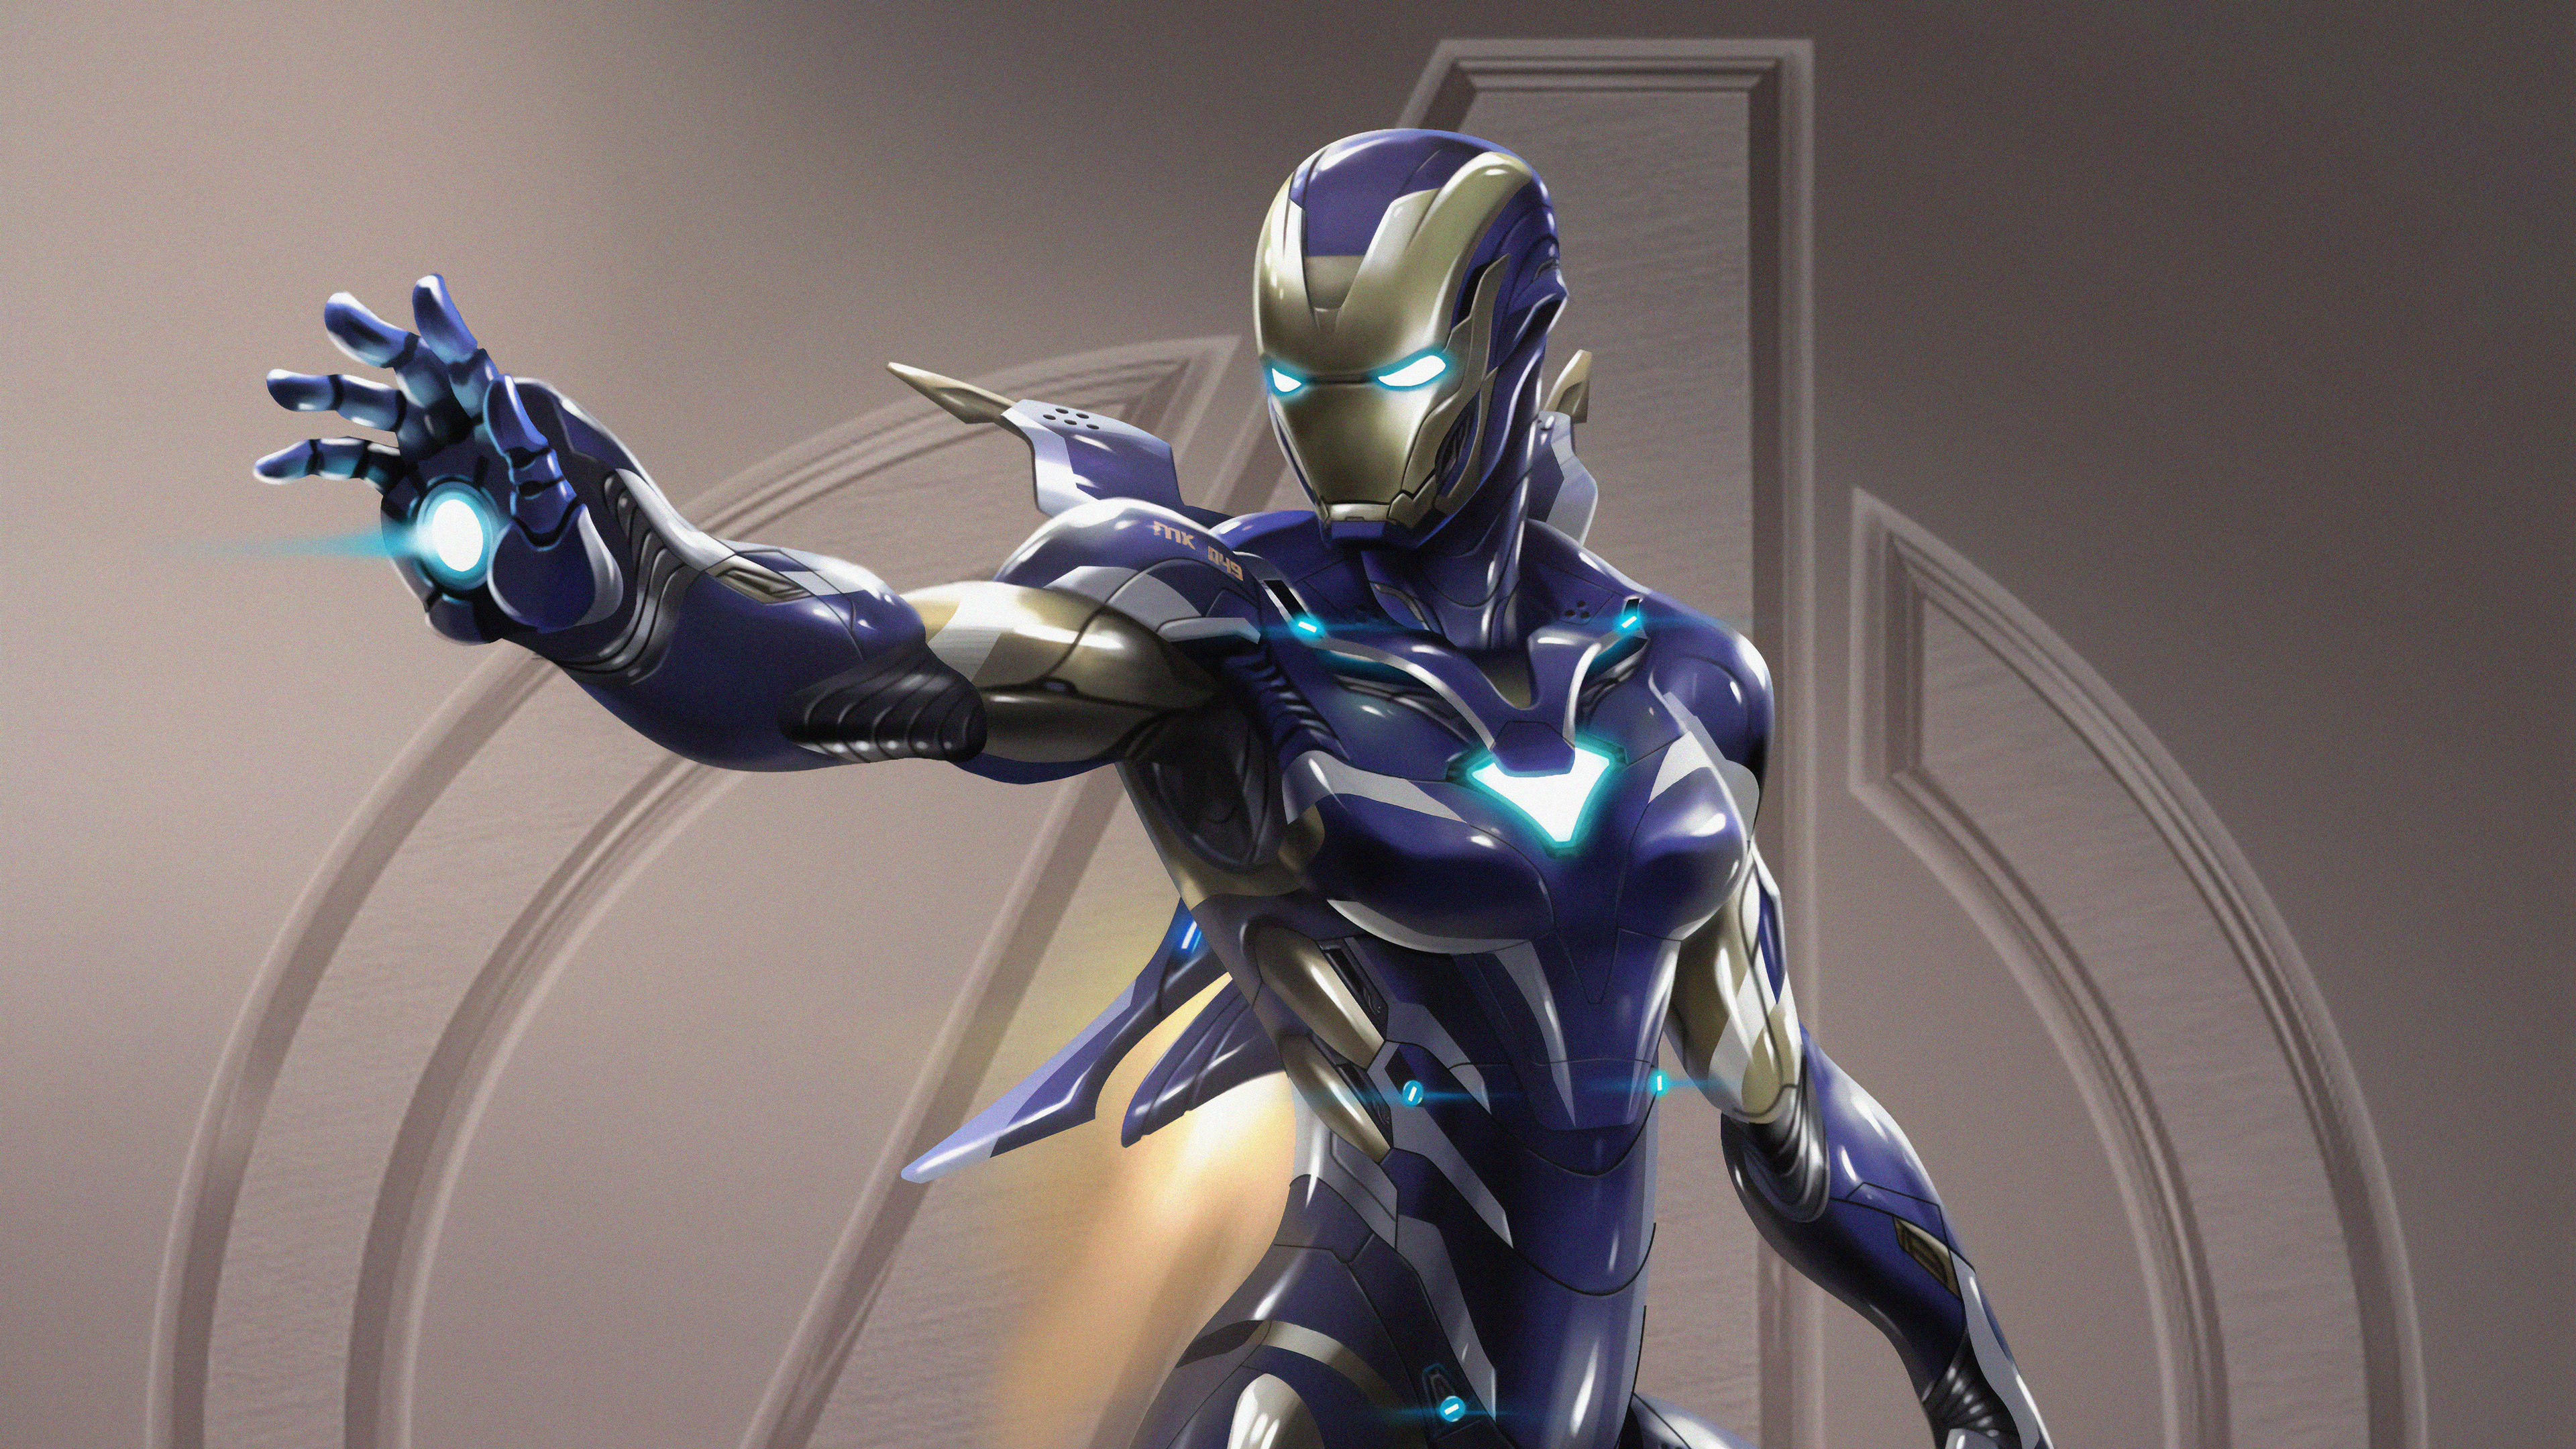 pepper potts rescue armor 1563220268 - Pepper Potts Rescue Armor - superheroes wallpapers, iron man wallpapers, hd-wallpapers, digital art wallpapers, artwork wallpapers, 4k-wallpapers